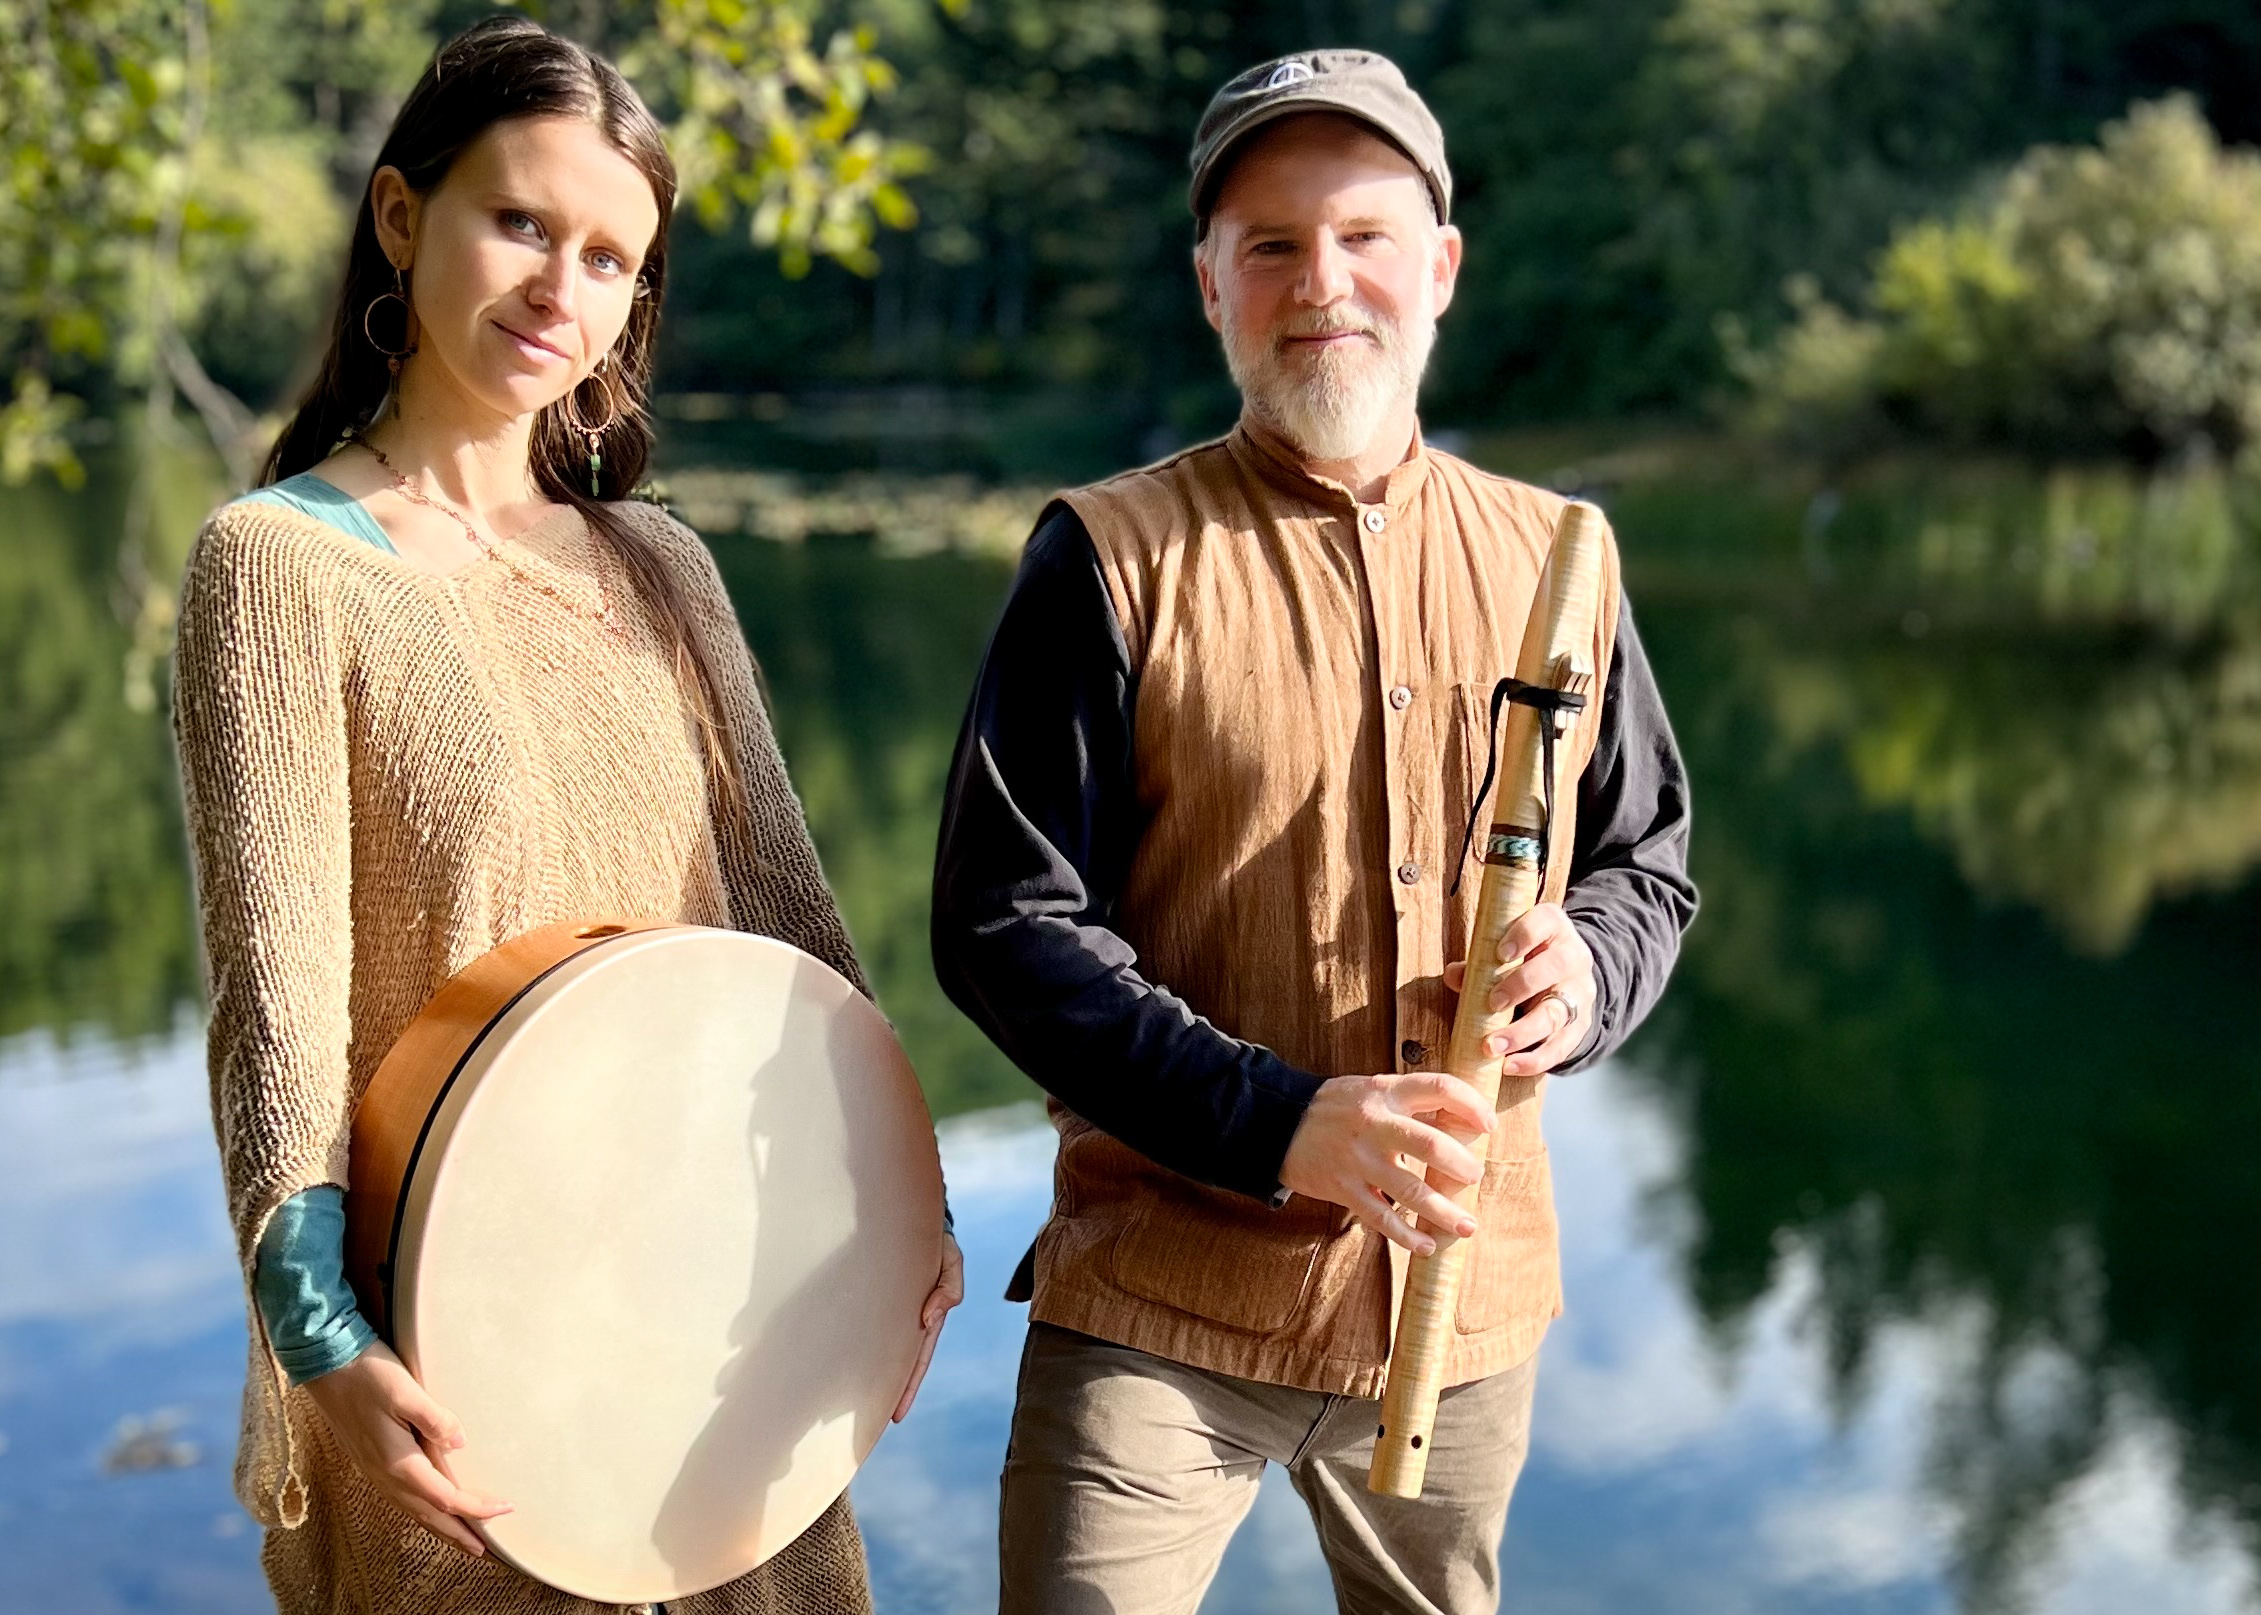 Elemental Peace: A Musical Prayer for the Planet